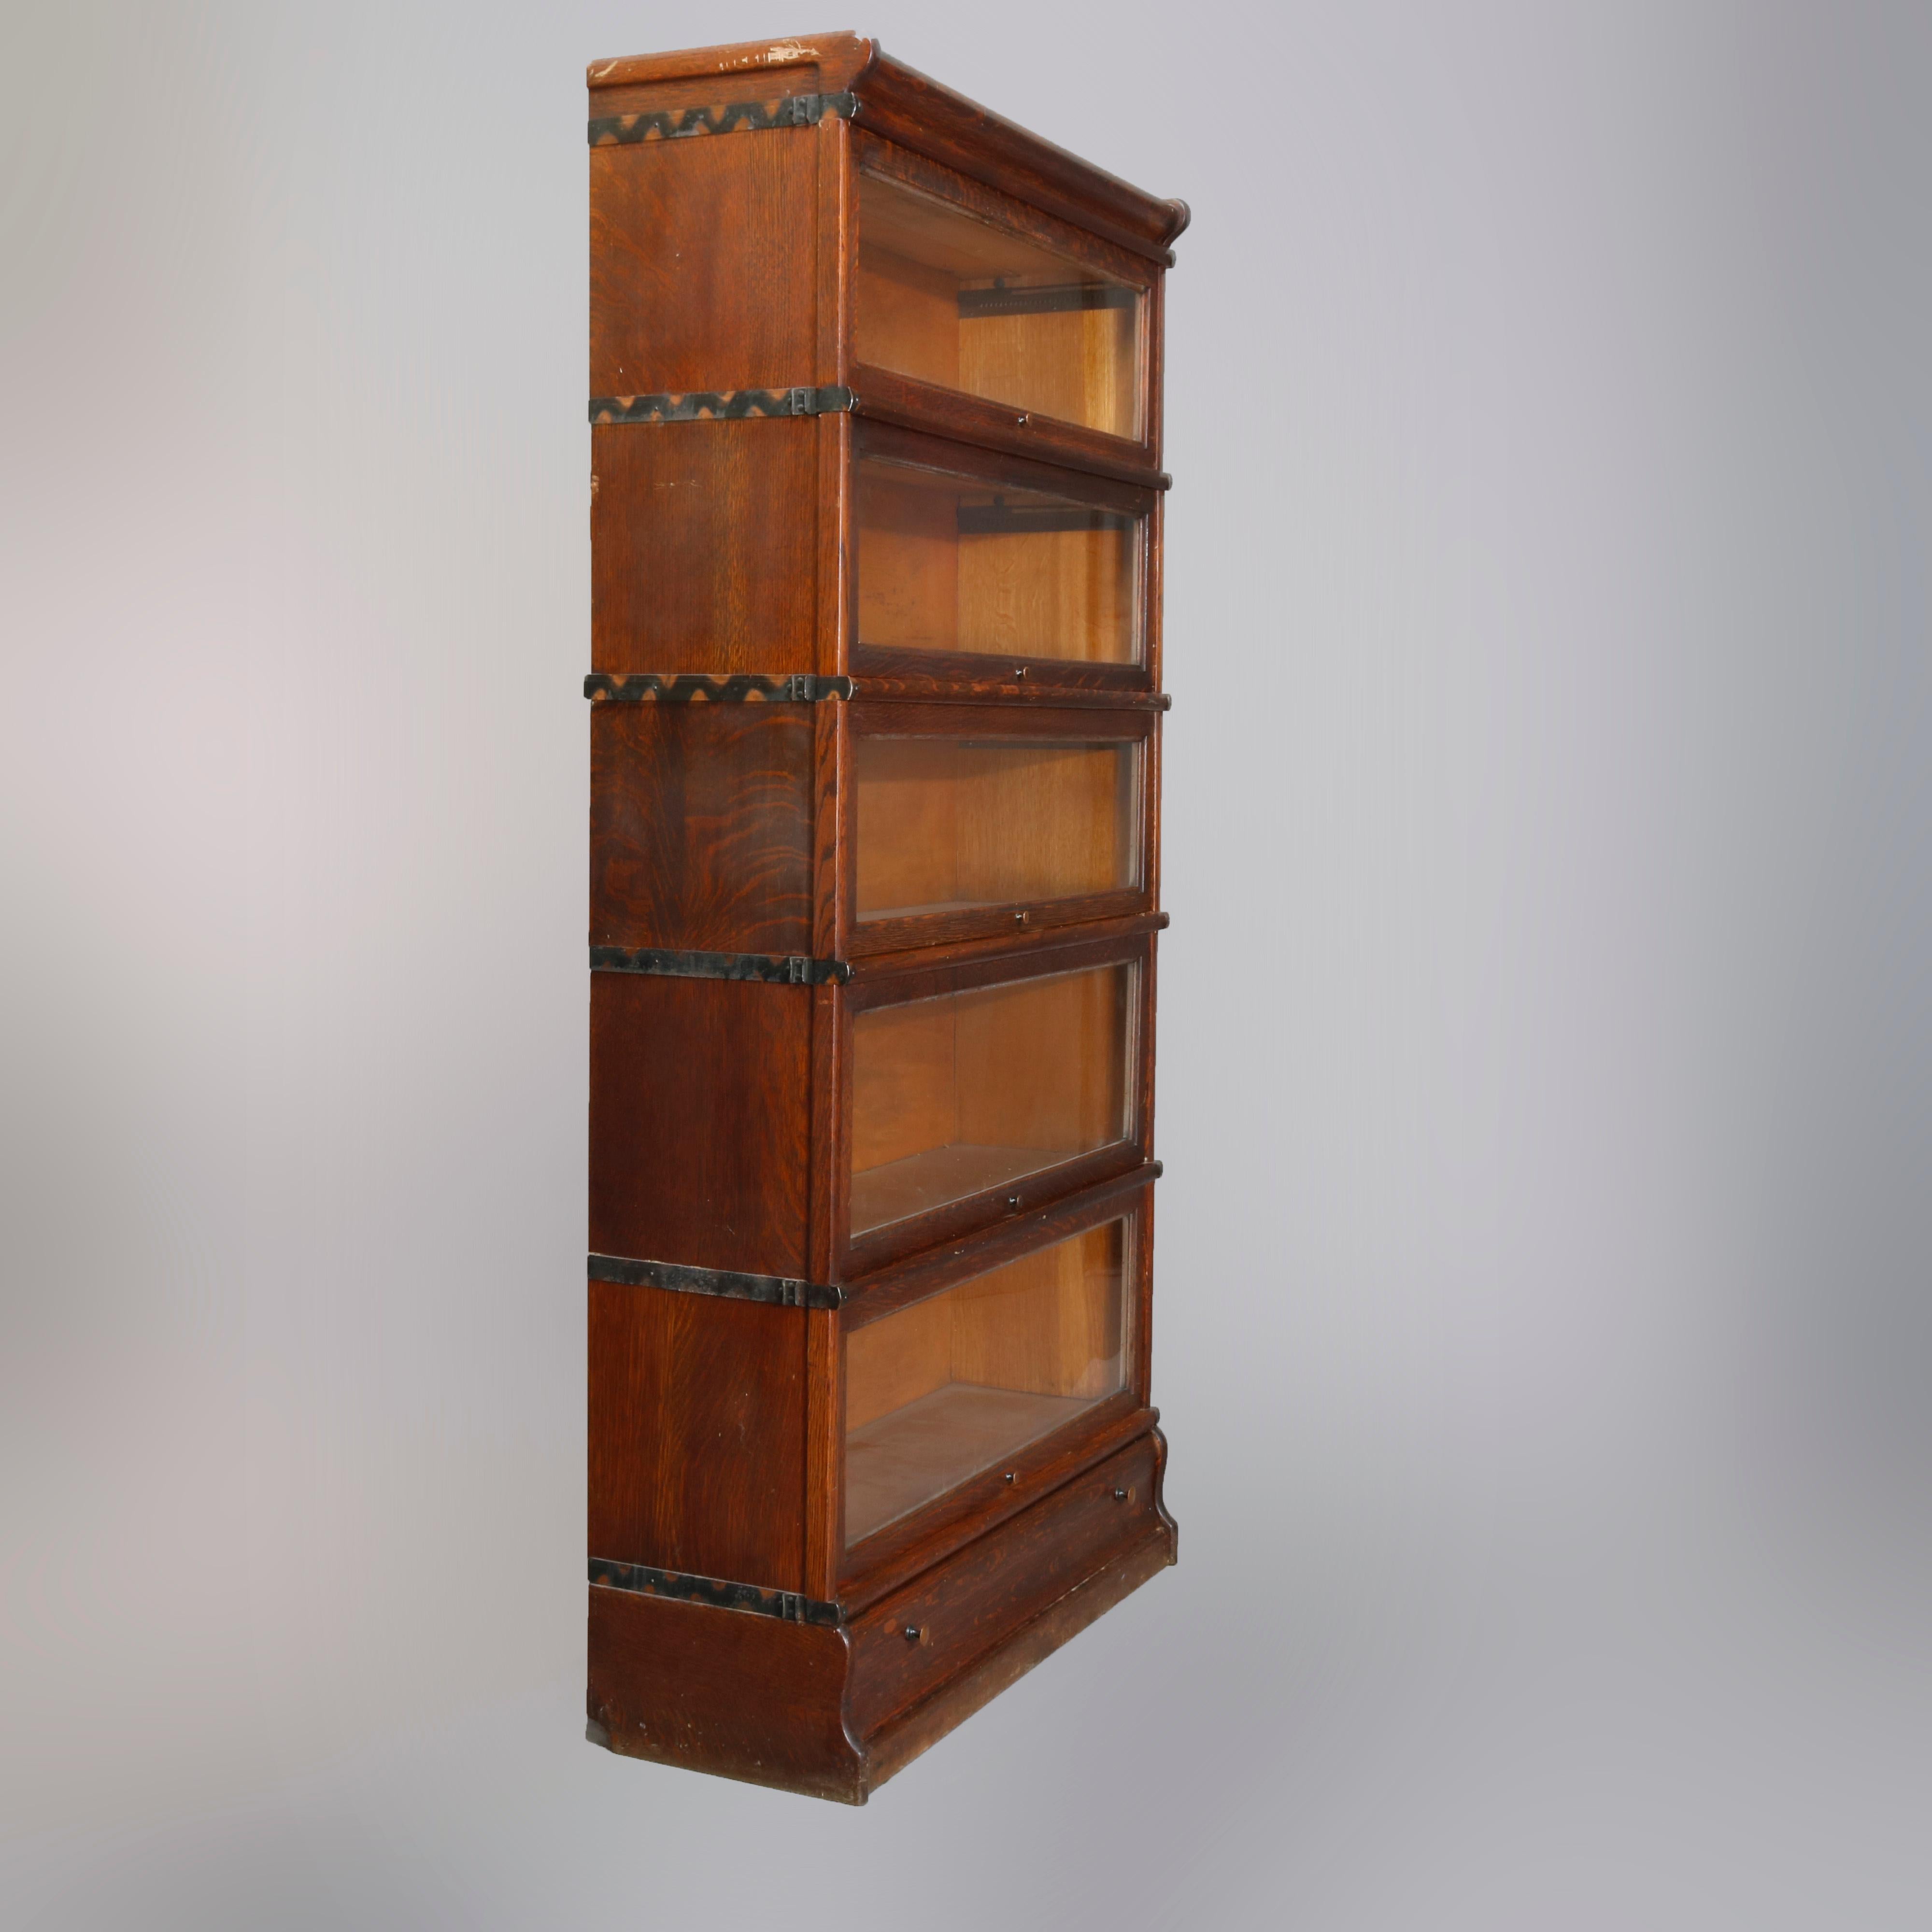 An Arts & Crafts sectional barrister bookcase by Macey, offers quarter sawn oak construction with five stacks each having a pull-down glass door on shaped base with drawer and surmounted by removable crown, maker stamped inside, circa